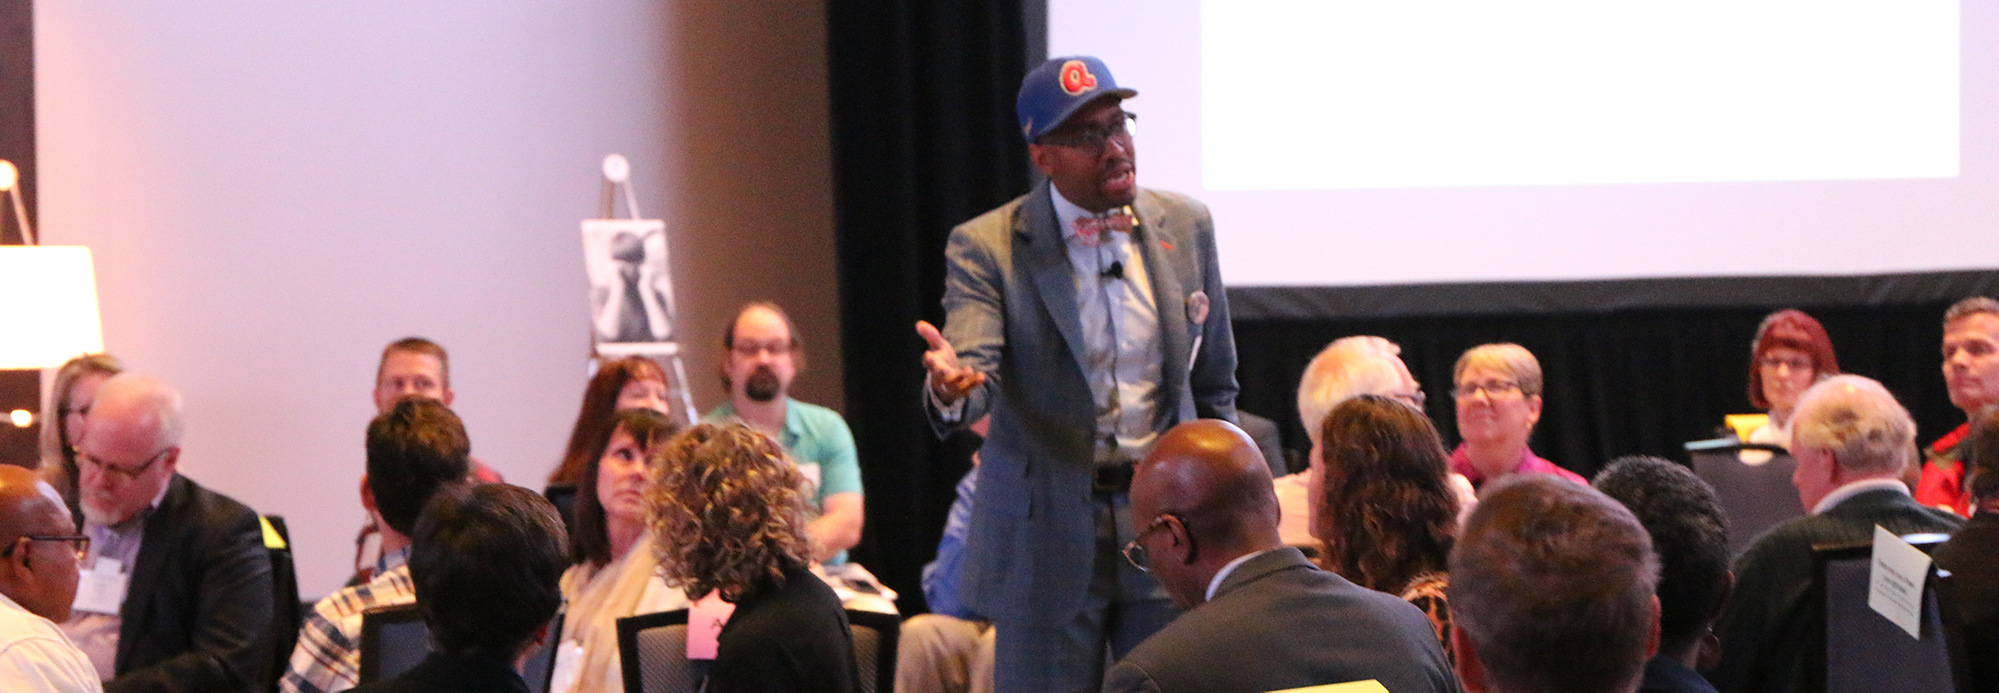 The Rev. Dr. Gregory C. Ellison II, founder of Fearless Dialogues, addressed the Mid Council Leaders Gathering in Chicago. Photo by Rick Jones.